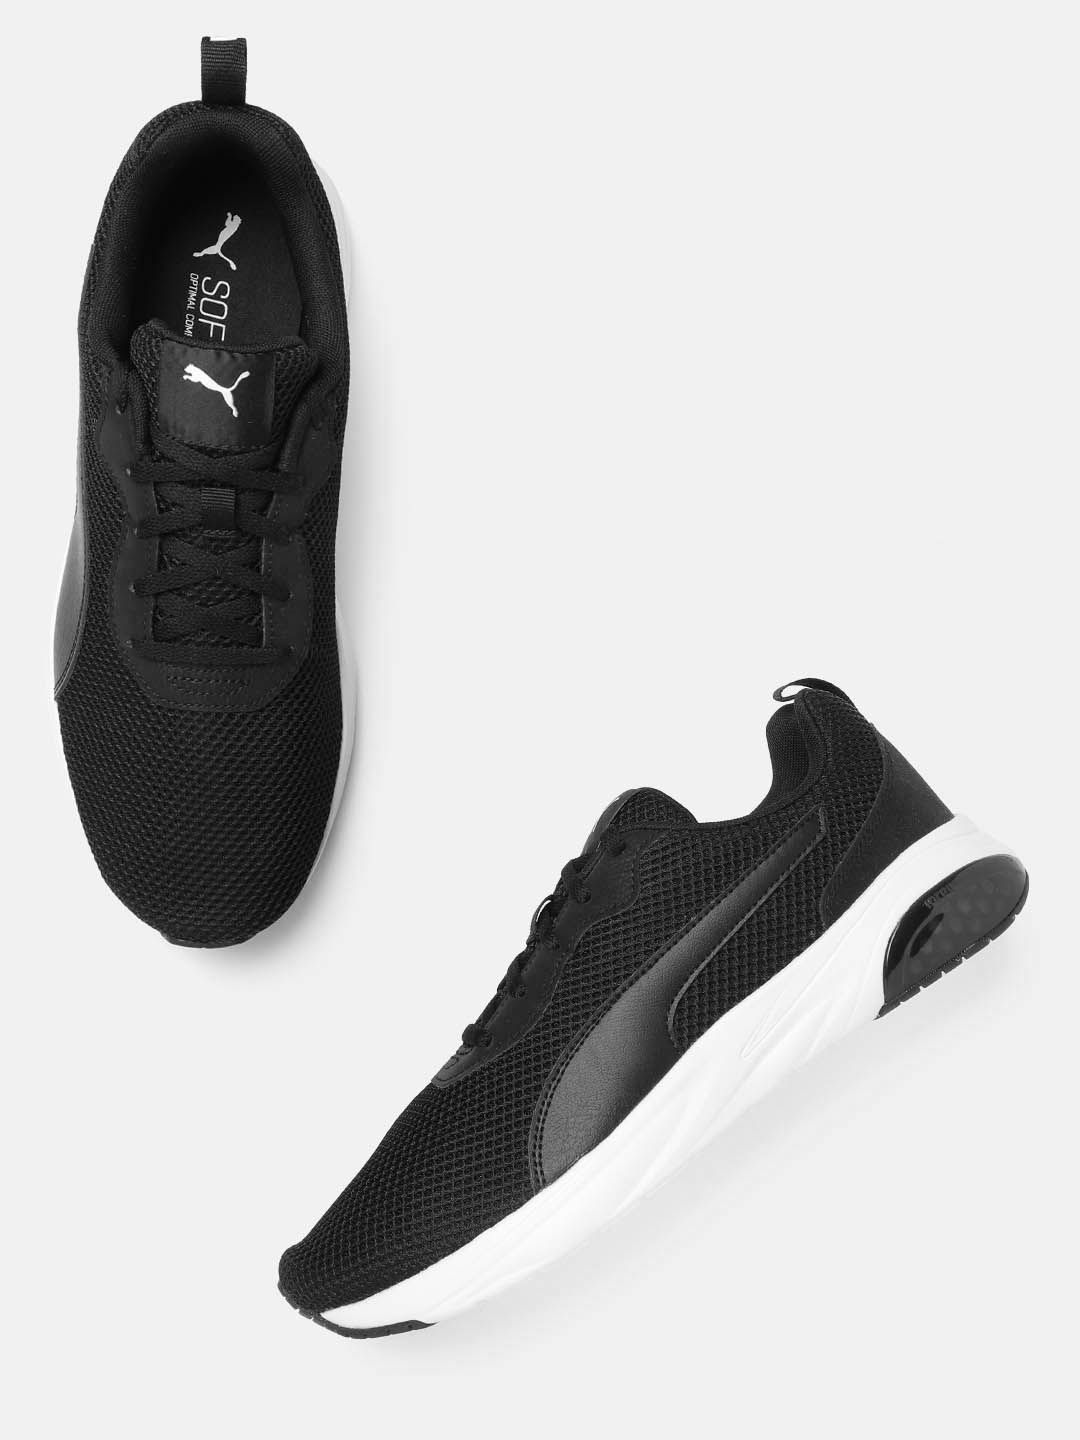 Puma Unisex Black Woven Design Cell Scion Running Shoes Price in India